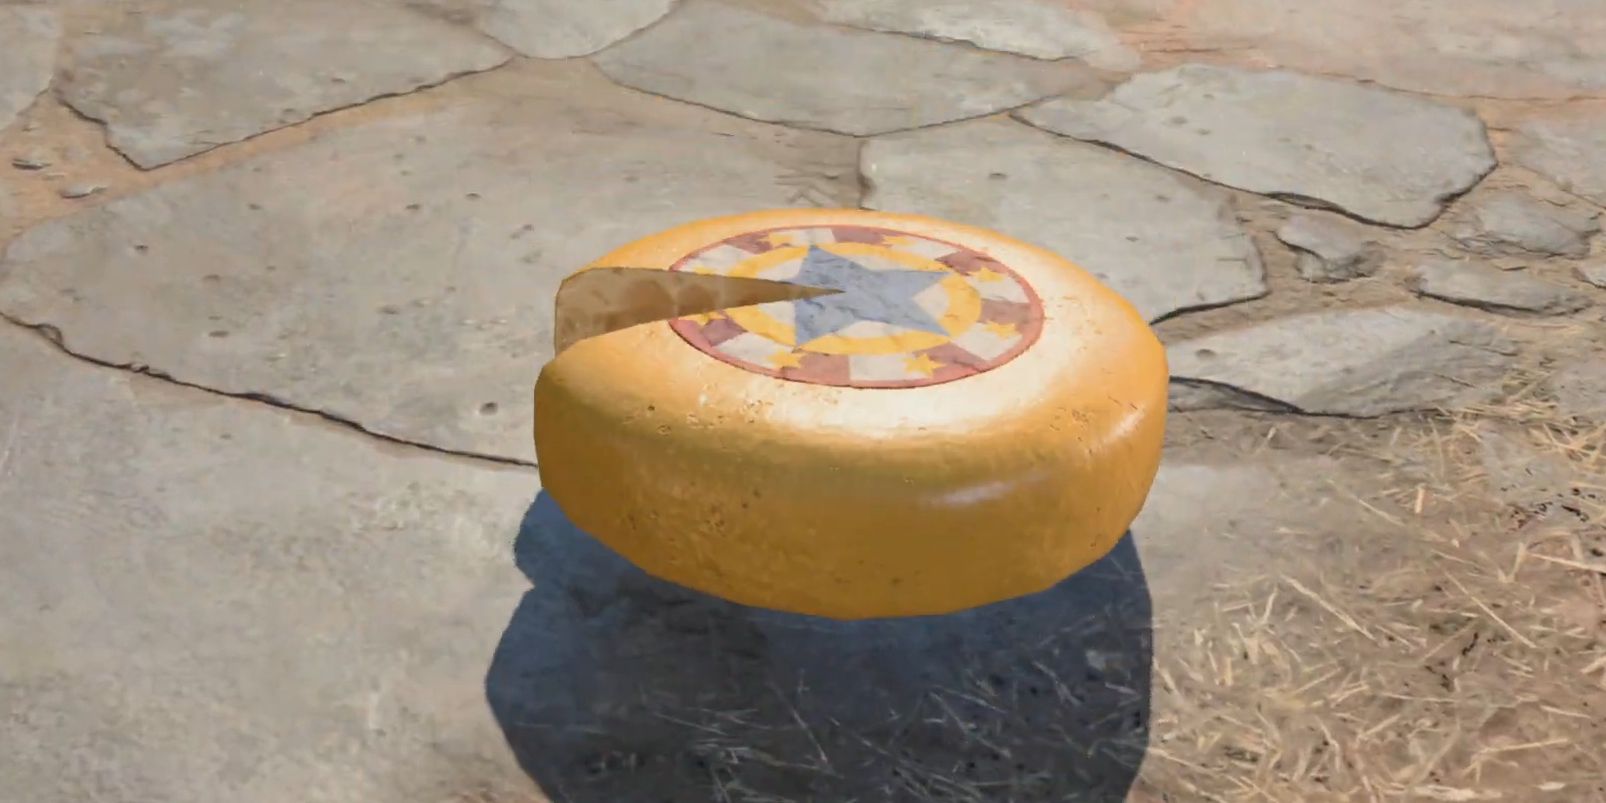 A player transformed into a Wheel Of Cheese in Baldur's Gate 3.